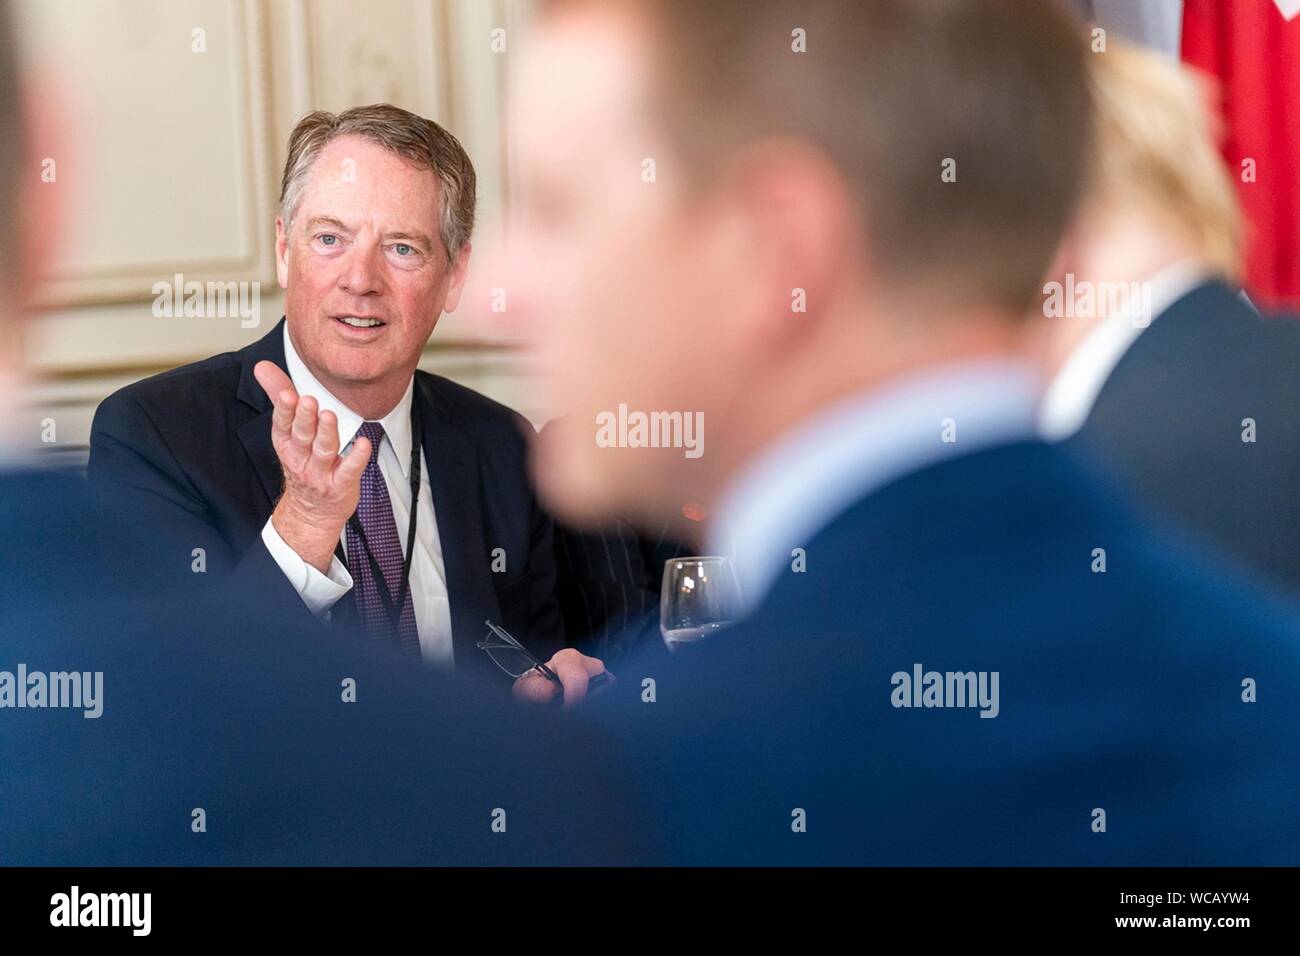 U.S. Trade Rep. Robert Lighthizer before the start of a working breakfast with President Donald Trump and British Prime Minister Boris Johnson and their delegations on the sidelines of the G7 Summit at the Hotel du Palais Biarritz August 25, 2019 in Biarritz, France. Stock Photo